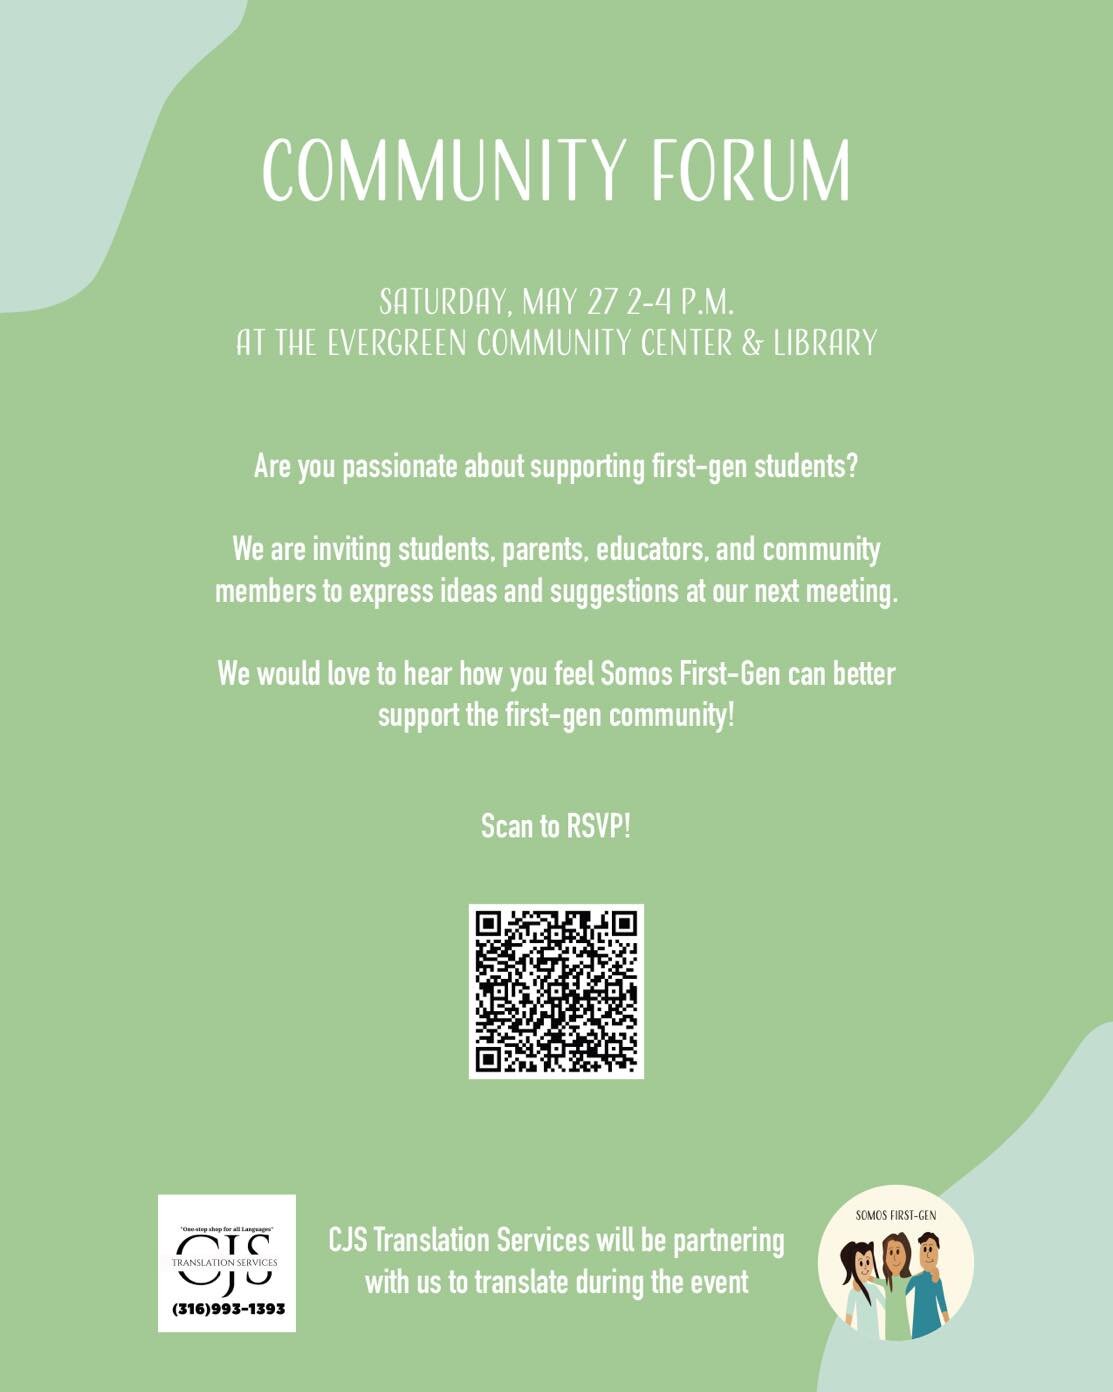 We are inviting students, parents, educators, and community members to express their ideas and suggestions on how we can best support first-generation students in our community! 
RSVP here: https://forms.gle/chn8WSG78Phez2yf8

Estamos invitado a los 